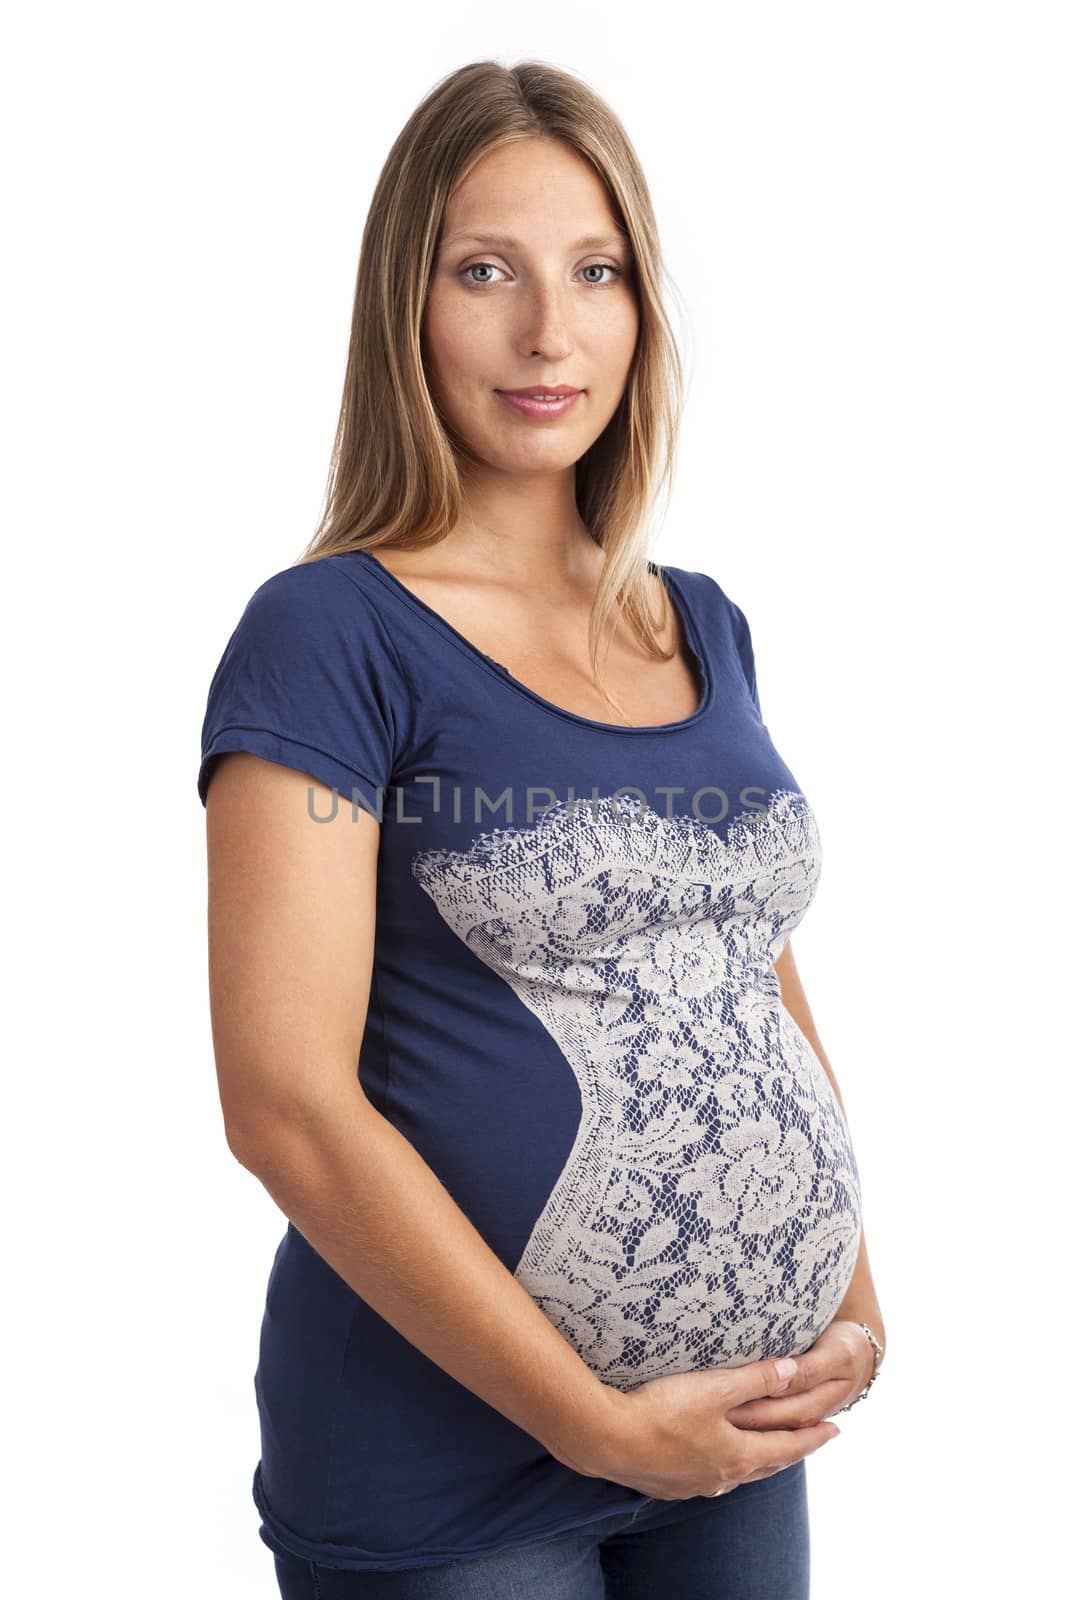 Young pregnant woman on a white background